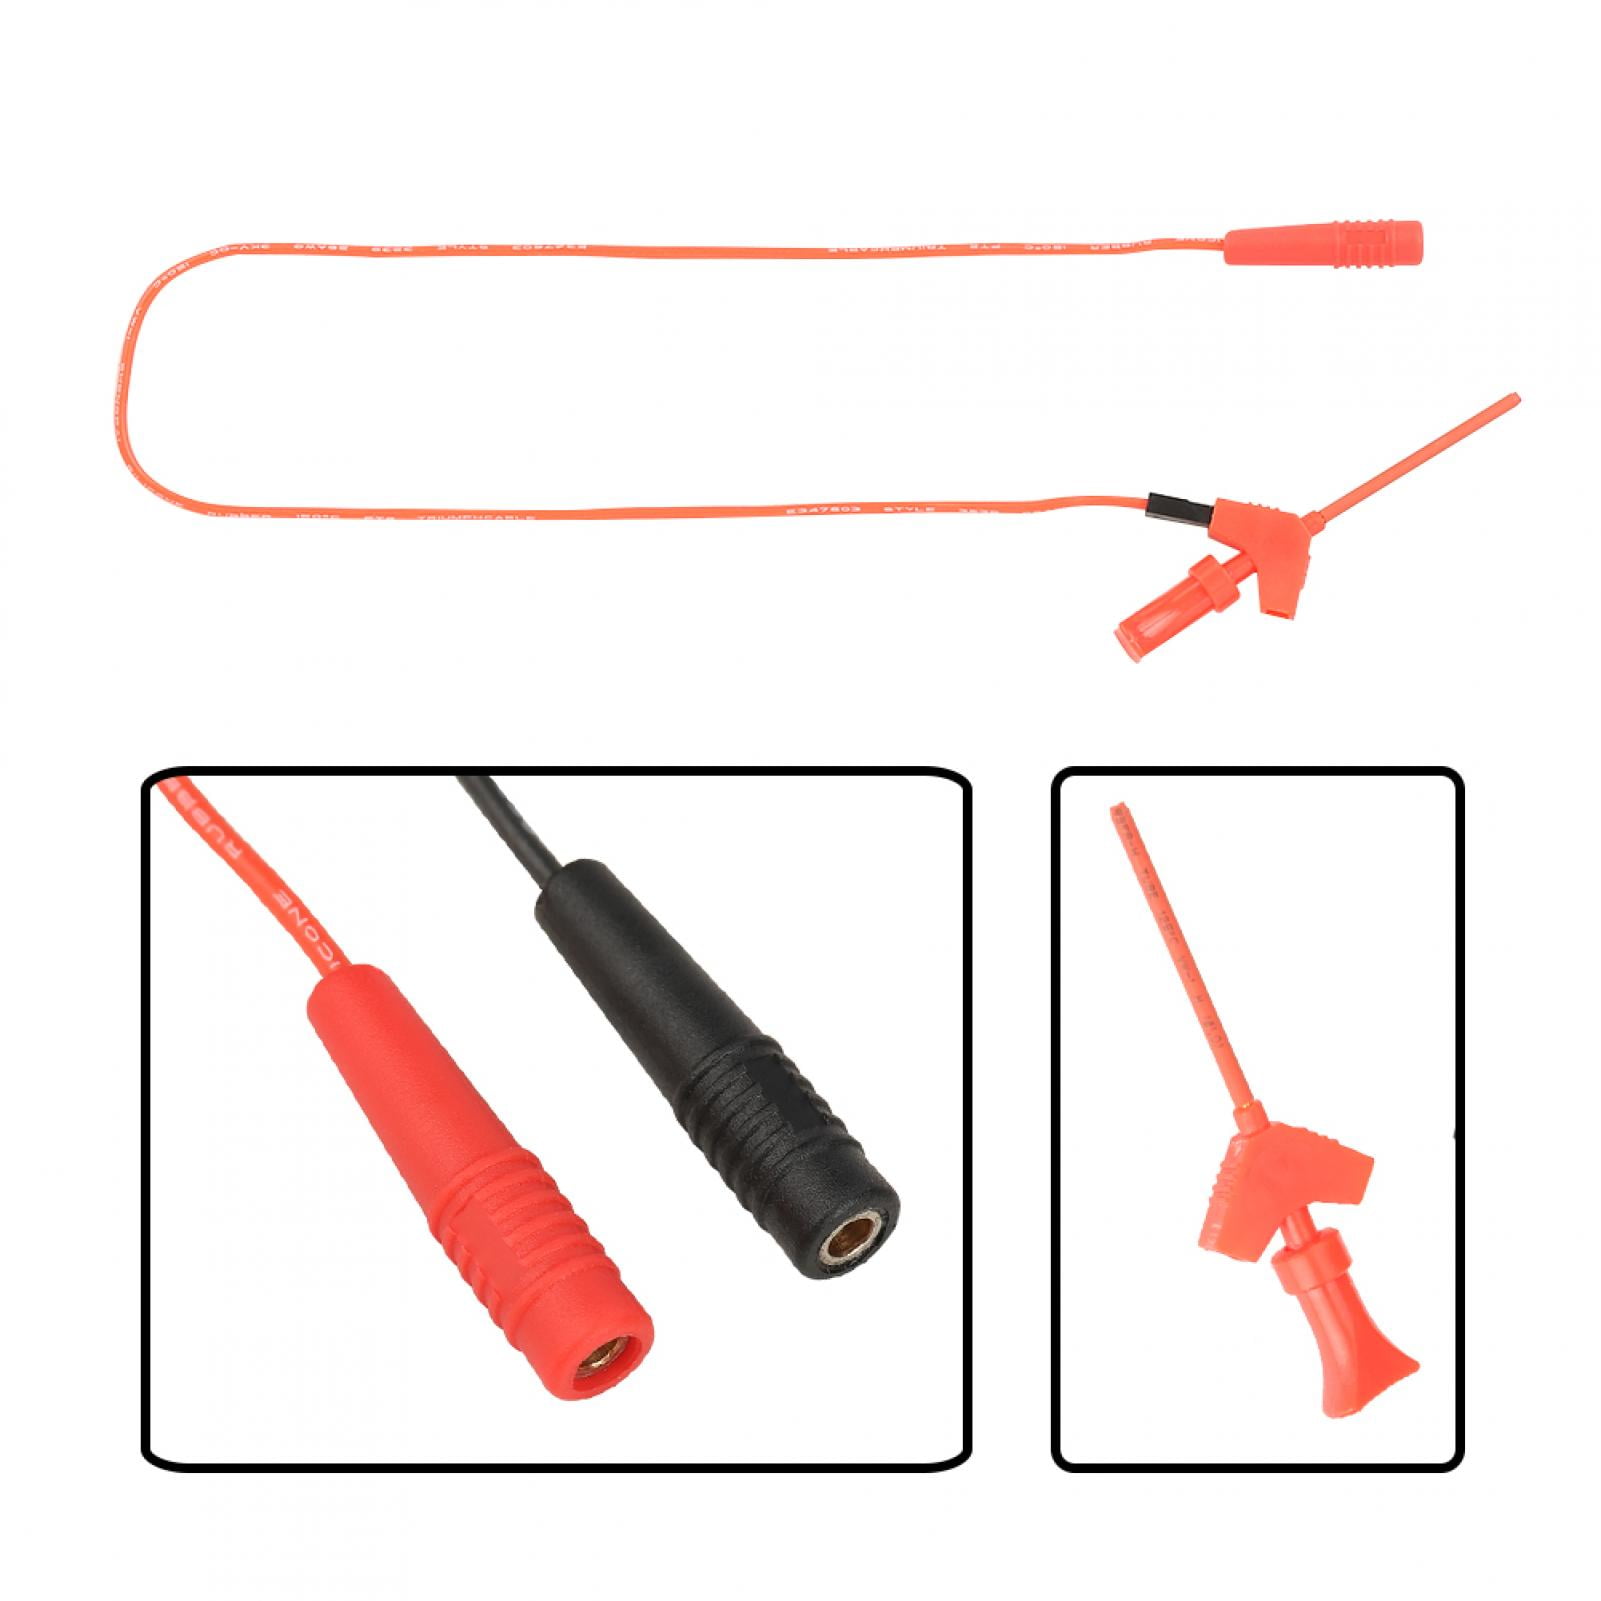 Test Hook Clip Test Probe Pins Test Leads Kit P1511b Spring Silicone Cable for Electrical Testing 2mm Black 2pcs 